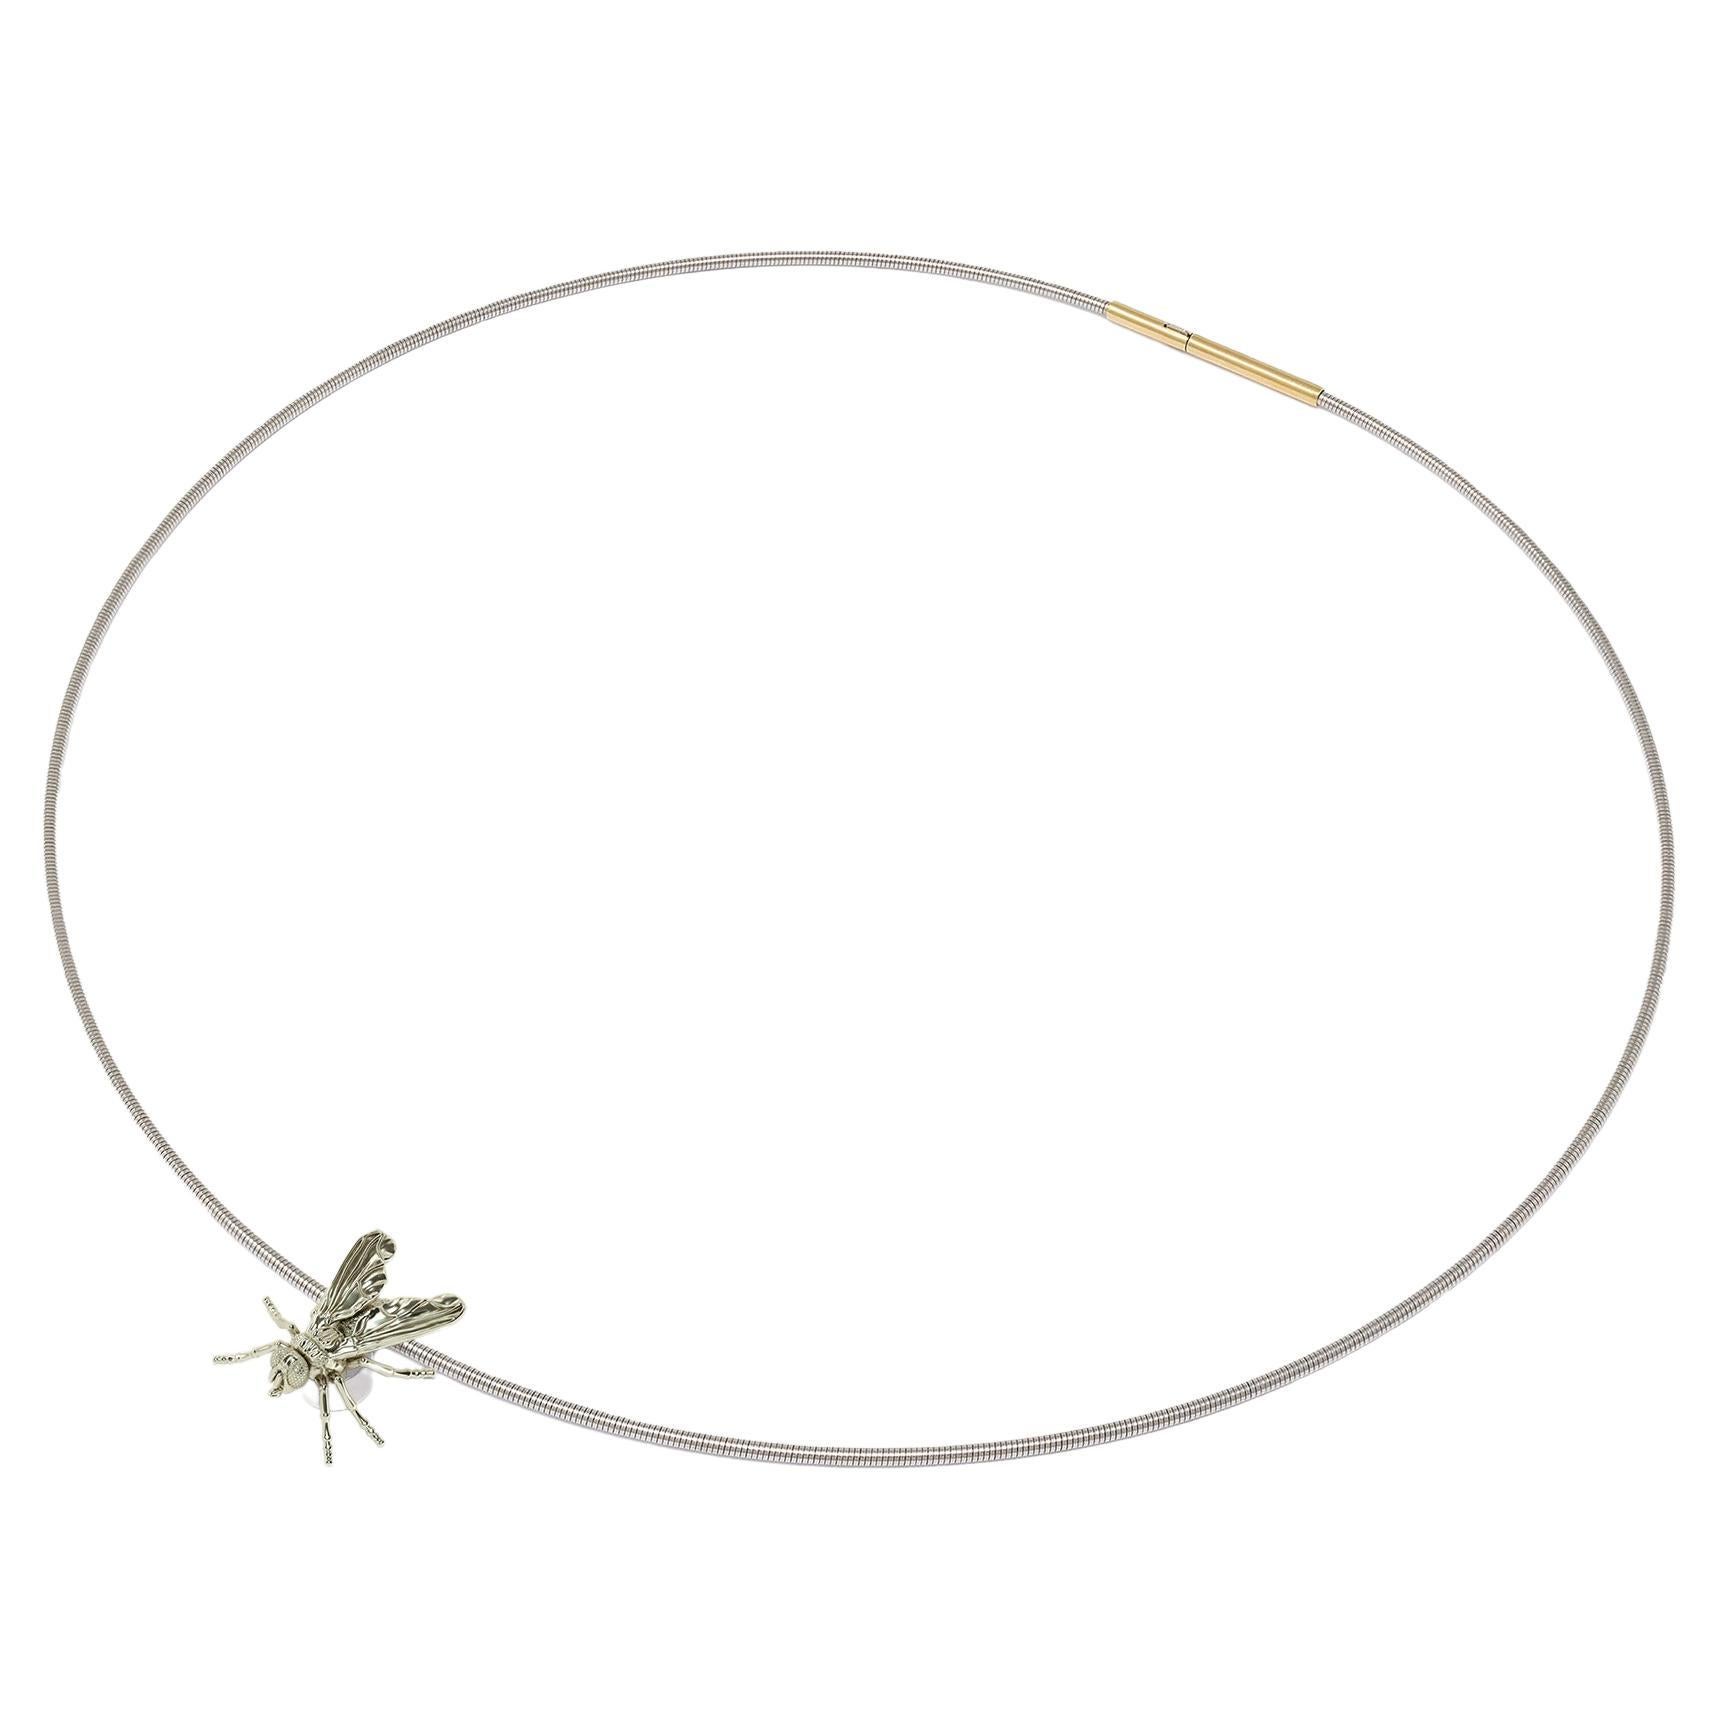 Necklace with Insect, 18k and Surgical Steel, nature necklace For Sale